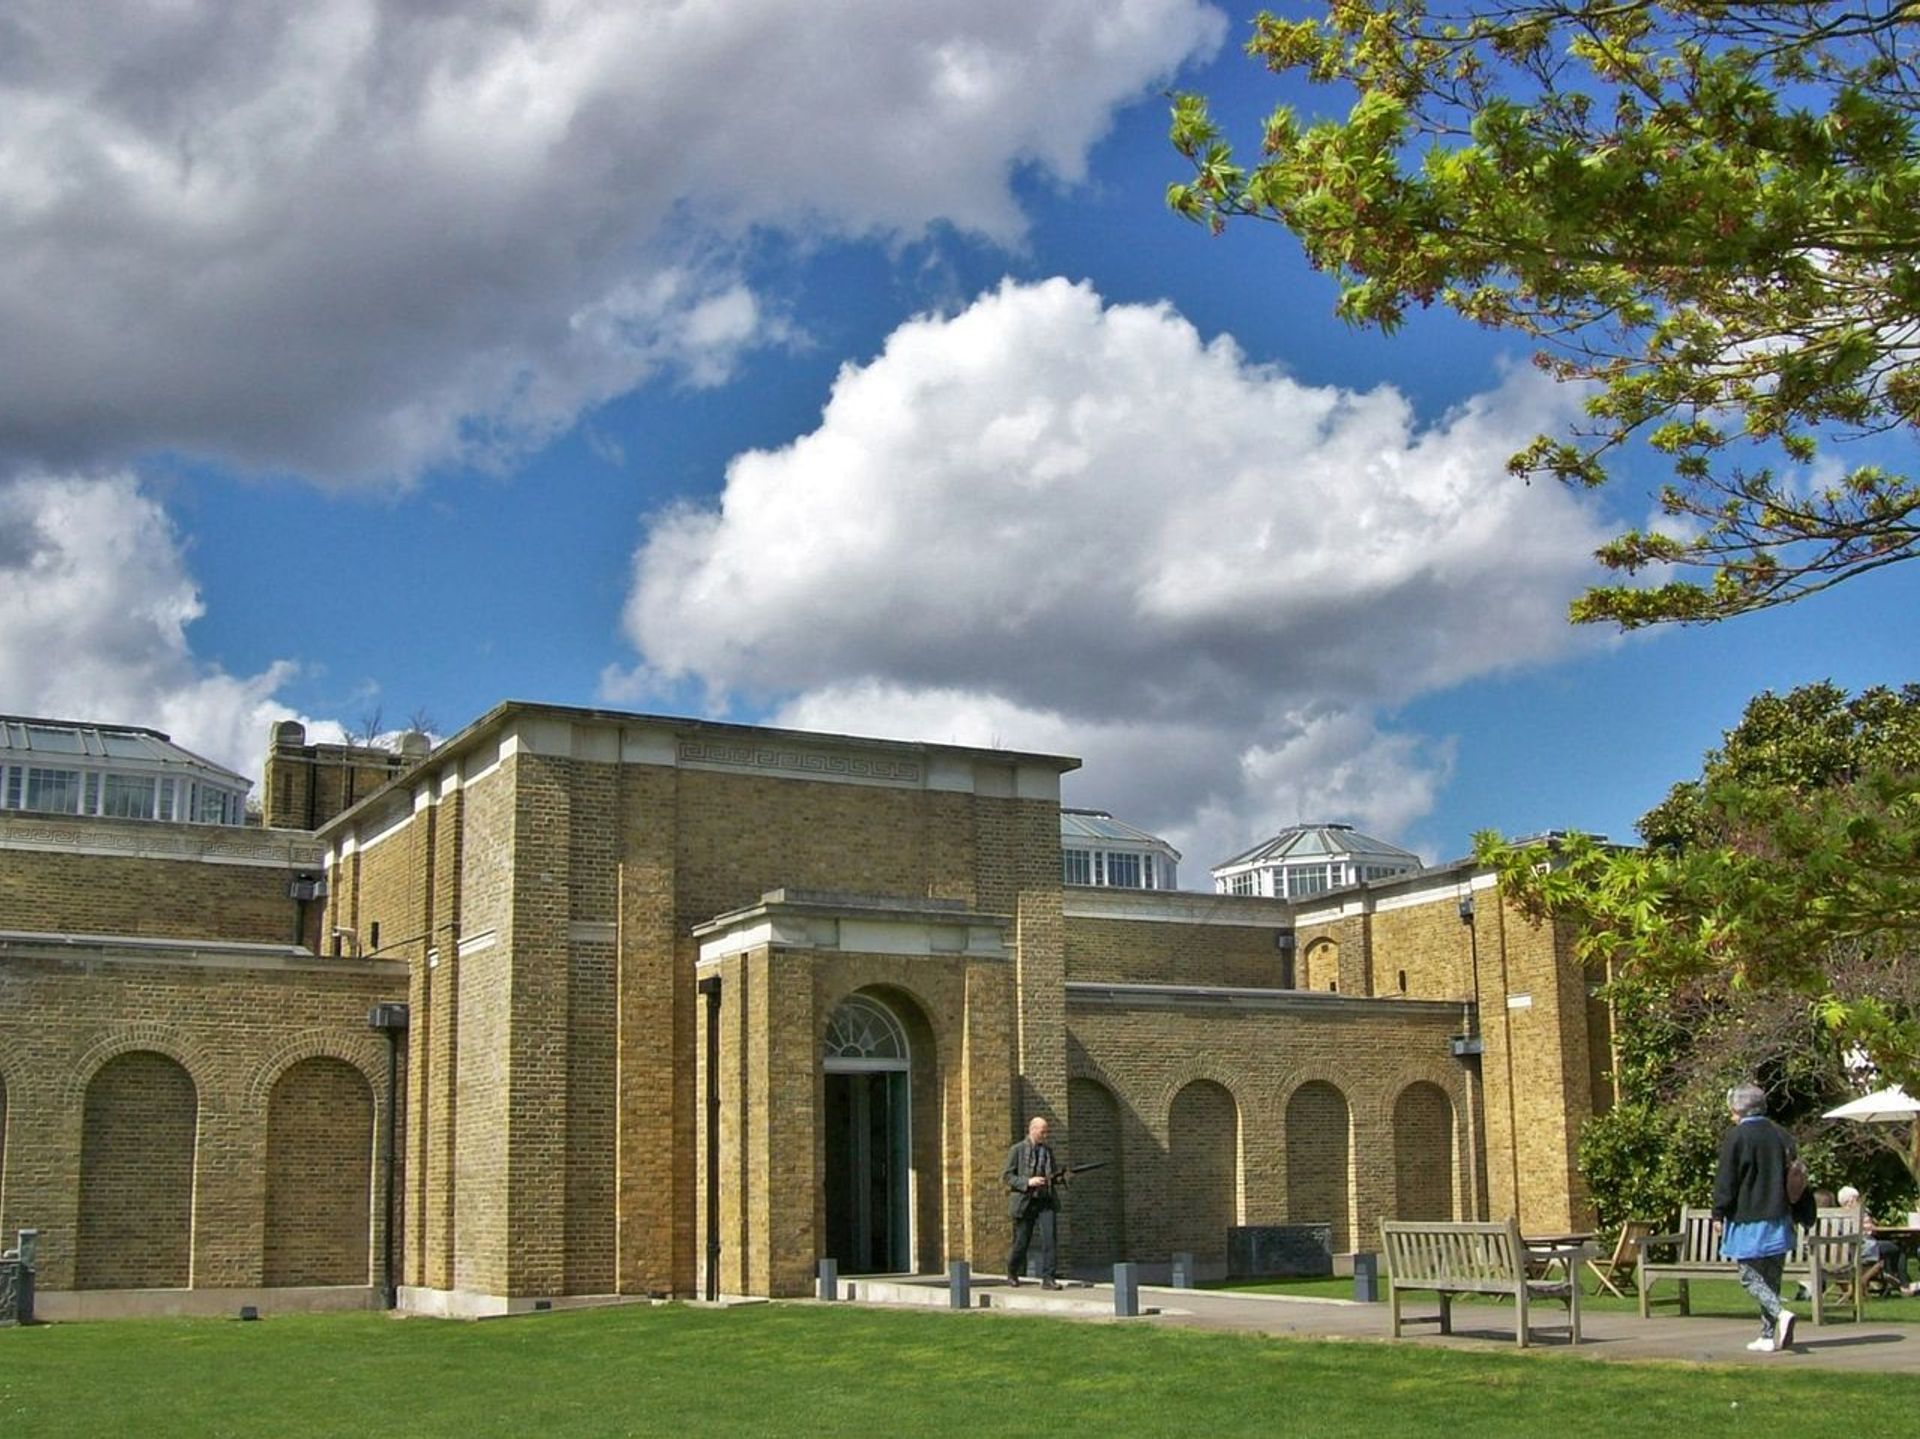 The main entrance of Dulwich Picture Gallery © Polophilio/Wikicommons